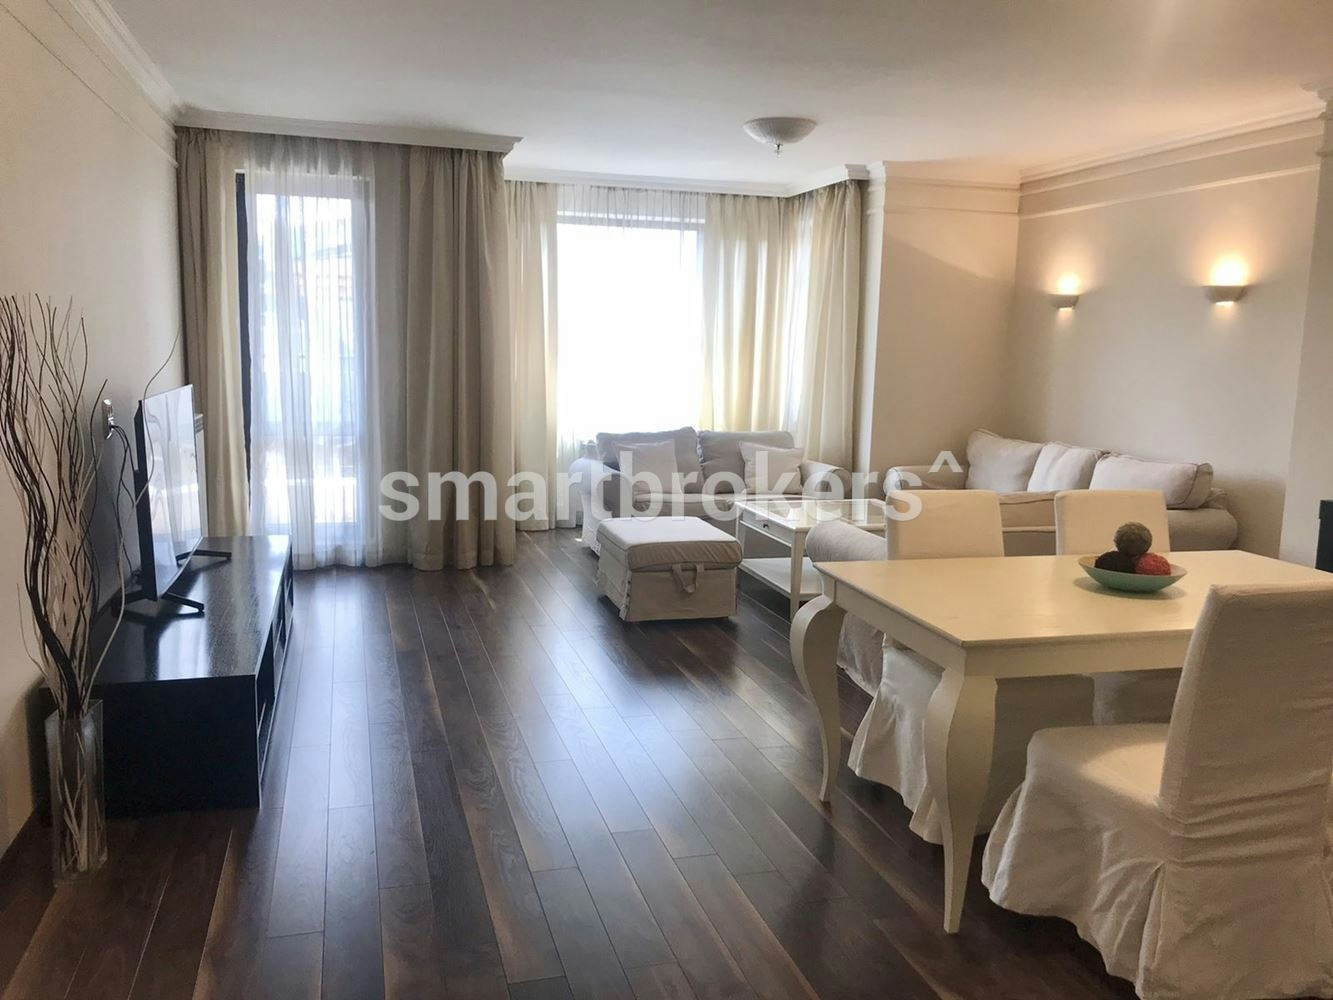 Two-bedroom apartment for rent in Lozenets, next to Marinela Hotel